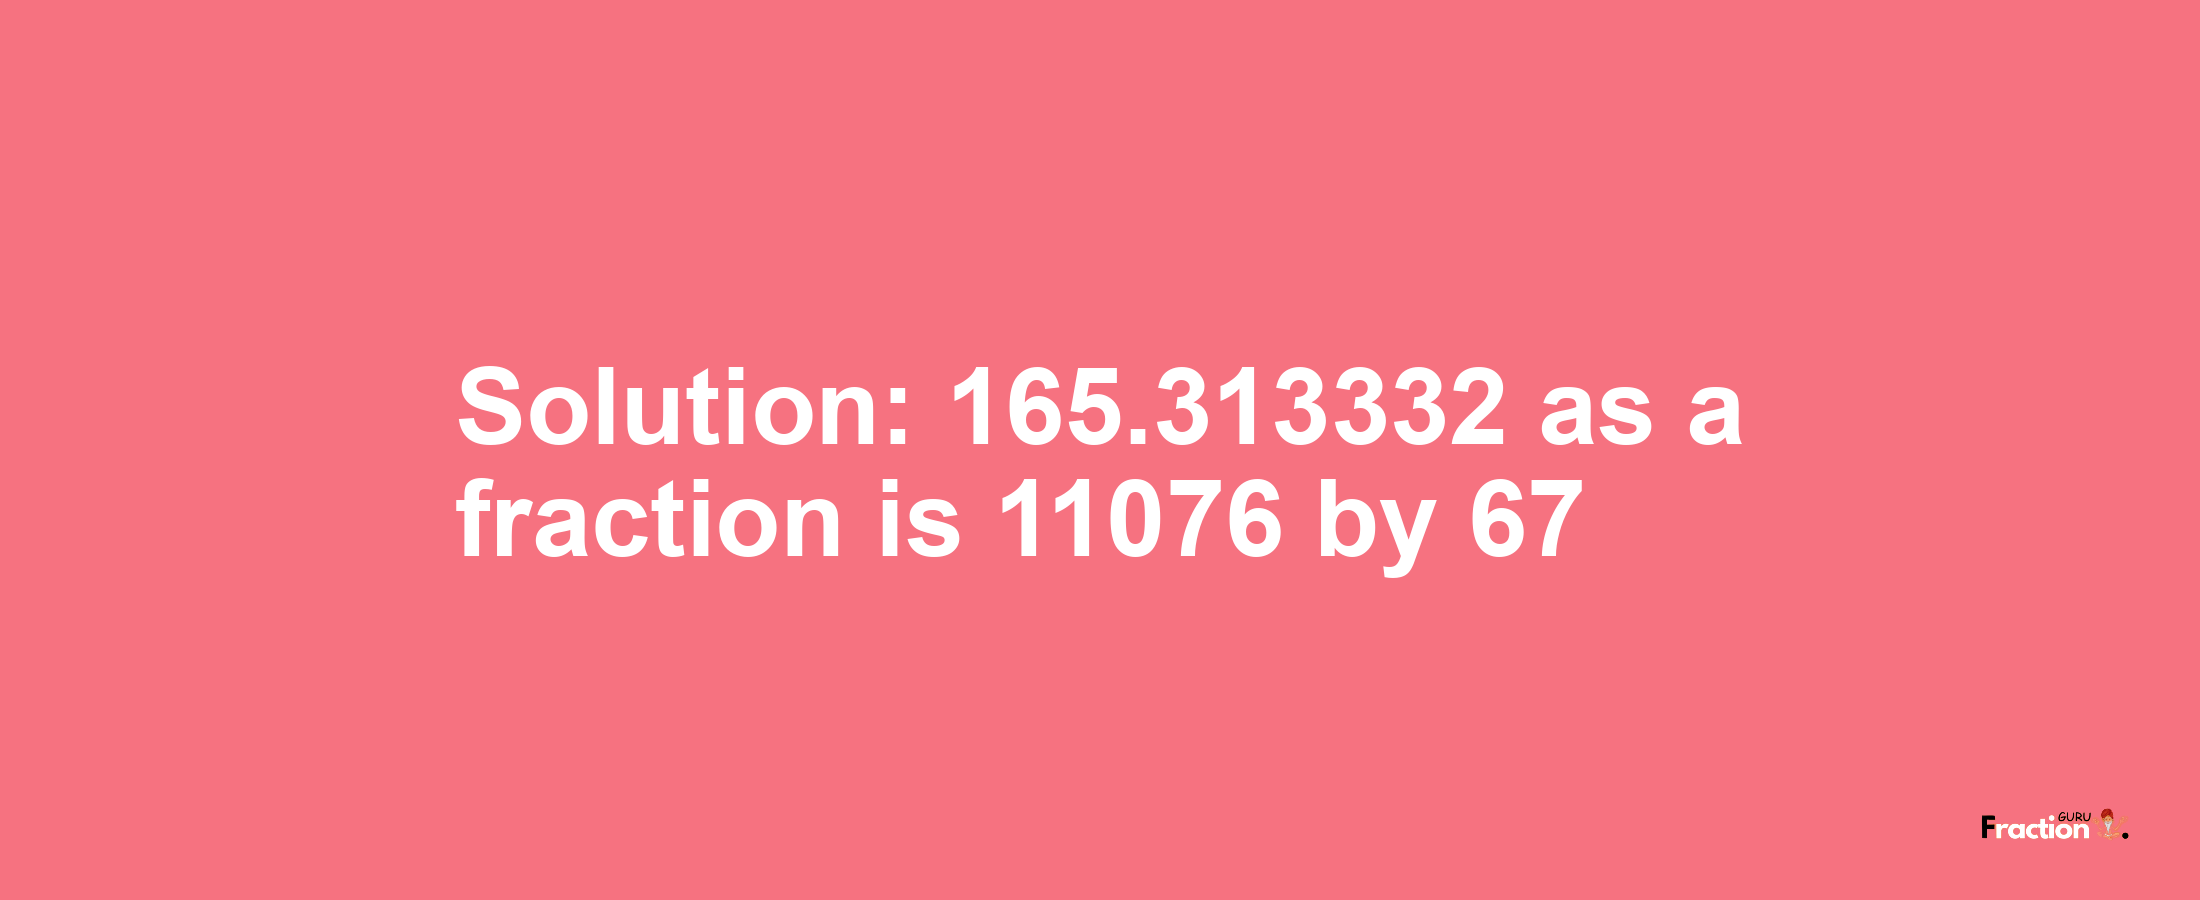 Solution:165.313332 as a fraction is 11076/67